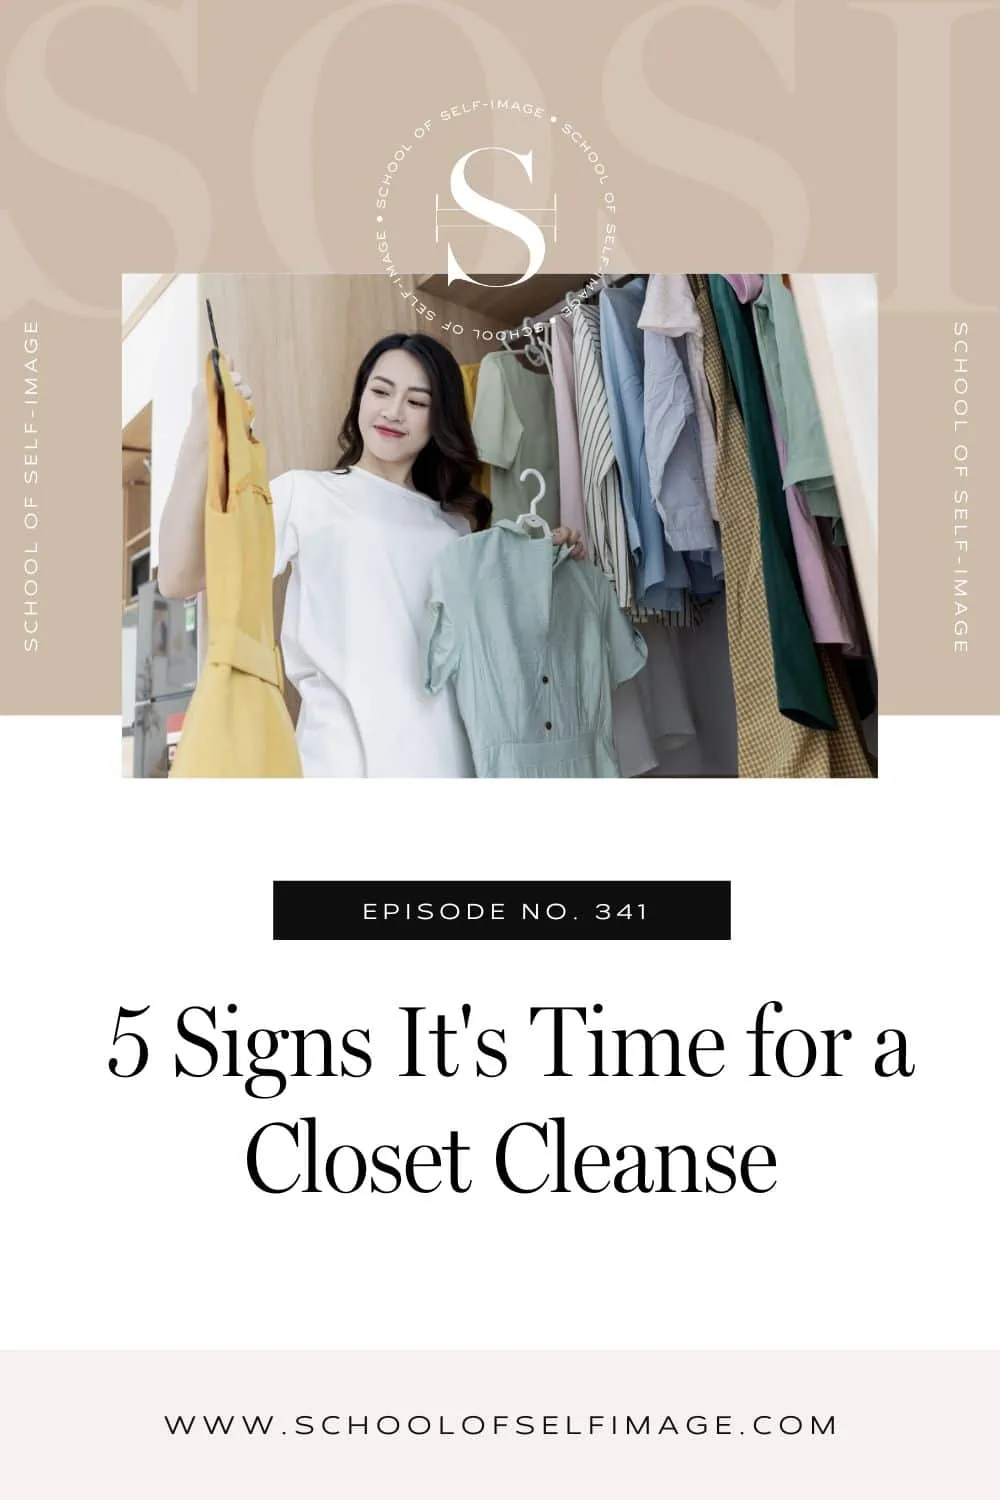 5 Signs its Time for a Closet Cleanse